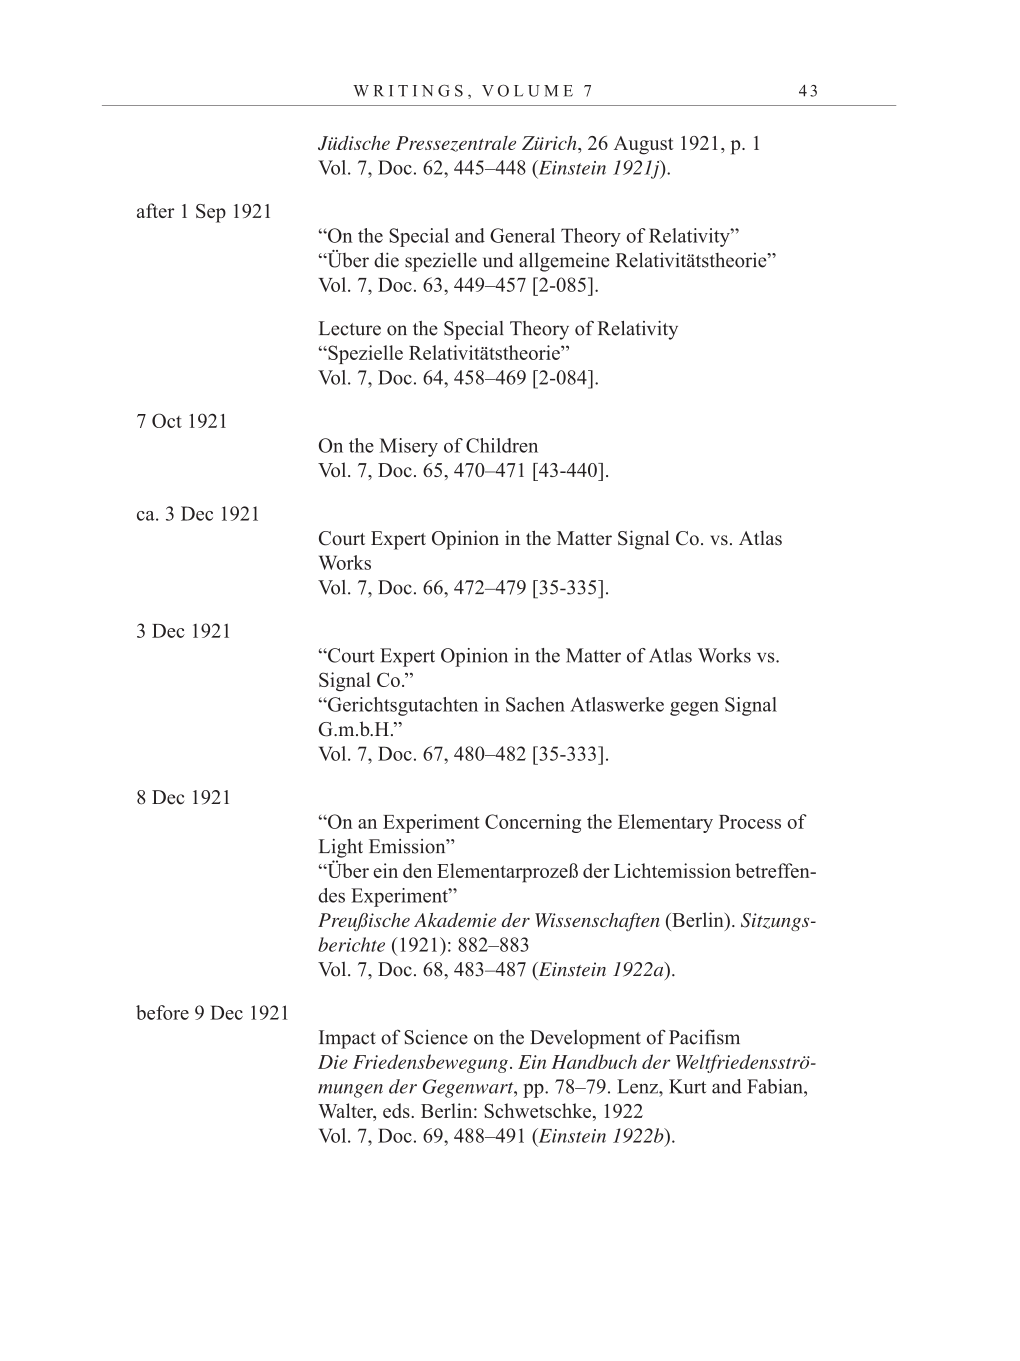 Volume 11: Cumulative Index, Bibliography, List of Correspondence, Chronology, and Errata to Volumes 1-10 page 43